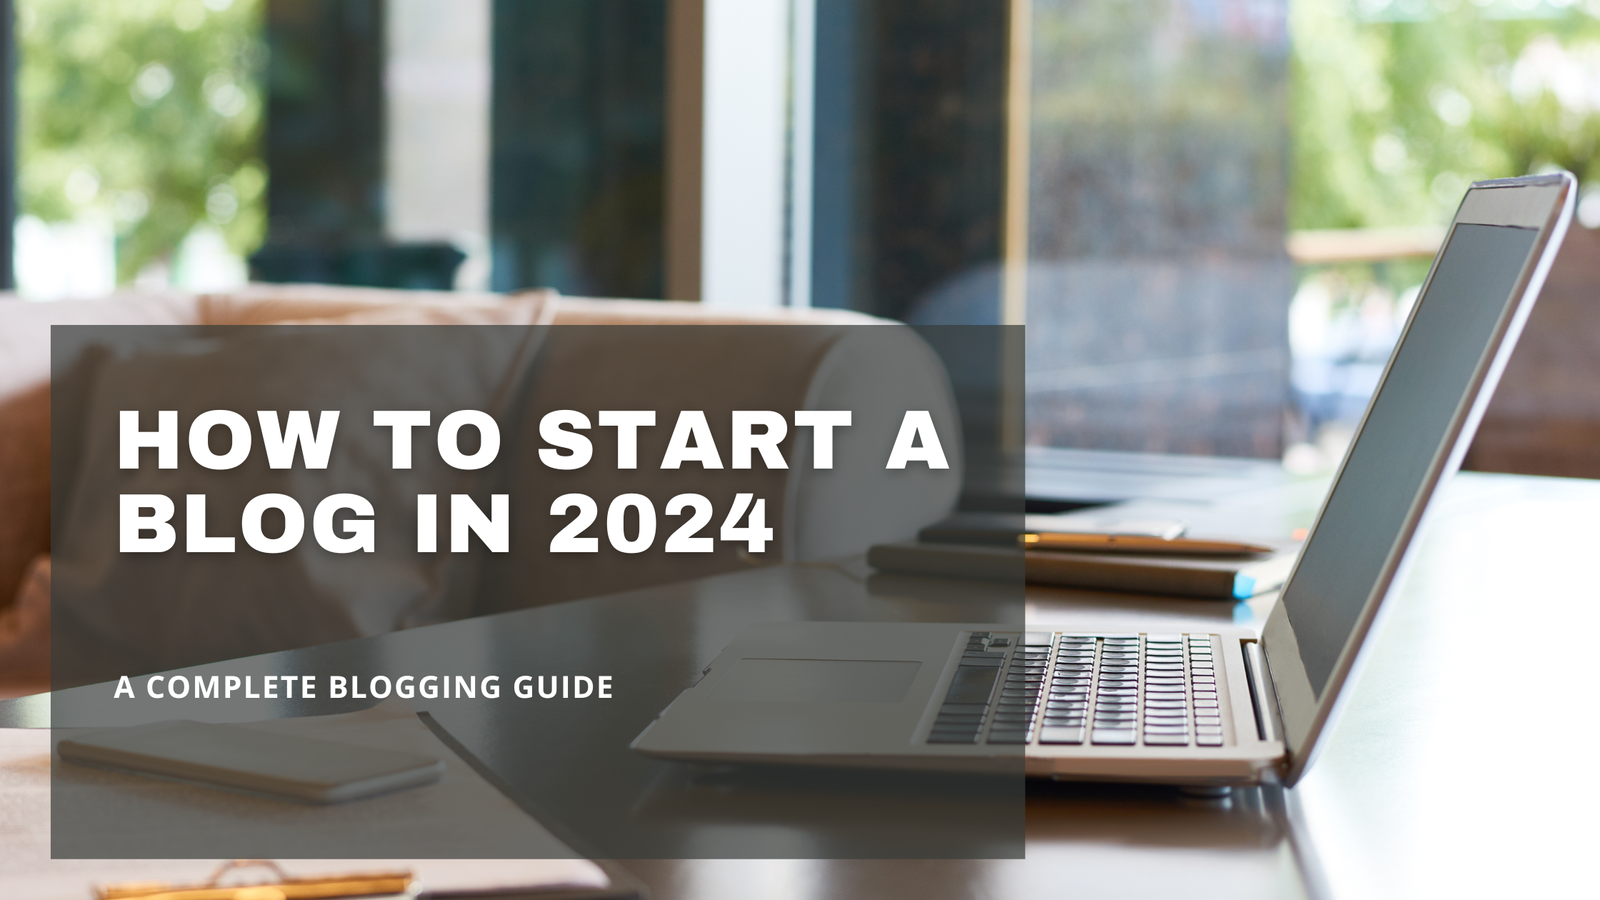 How to start a blog? A complete blogging guide